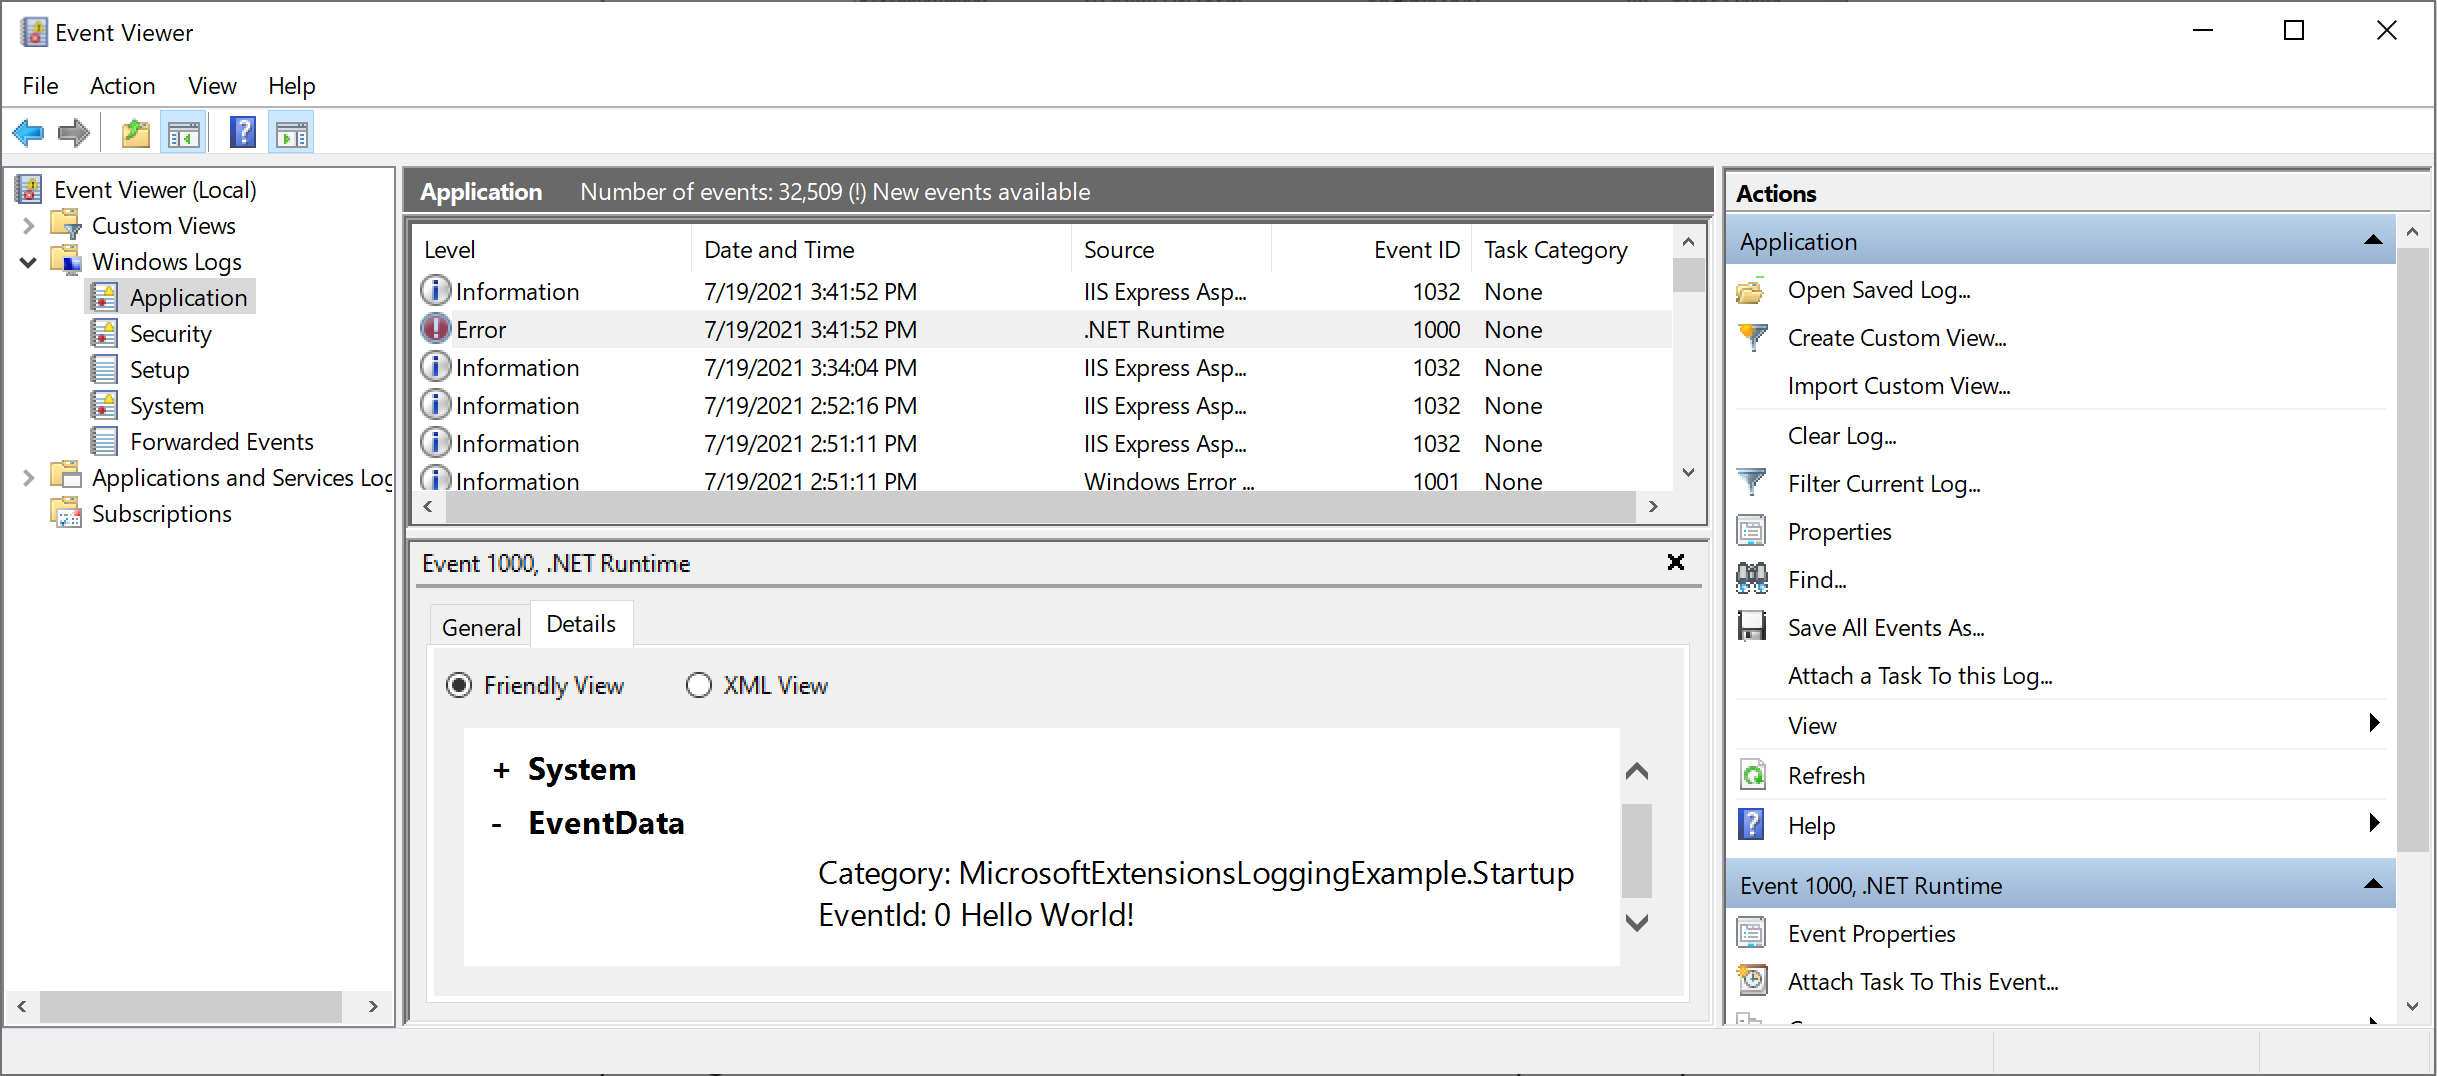 Event Viewer screenshot showing the "Hello World" error log that was sent to the console